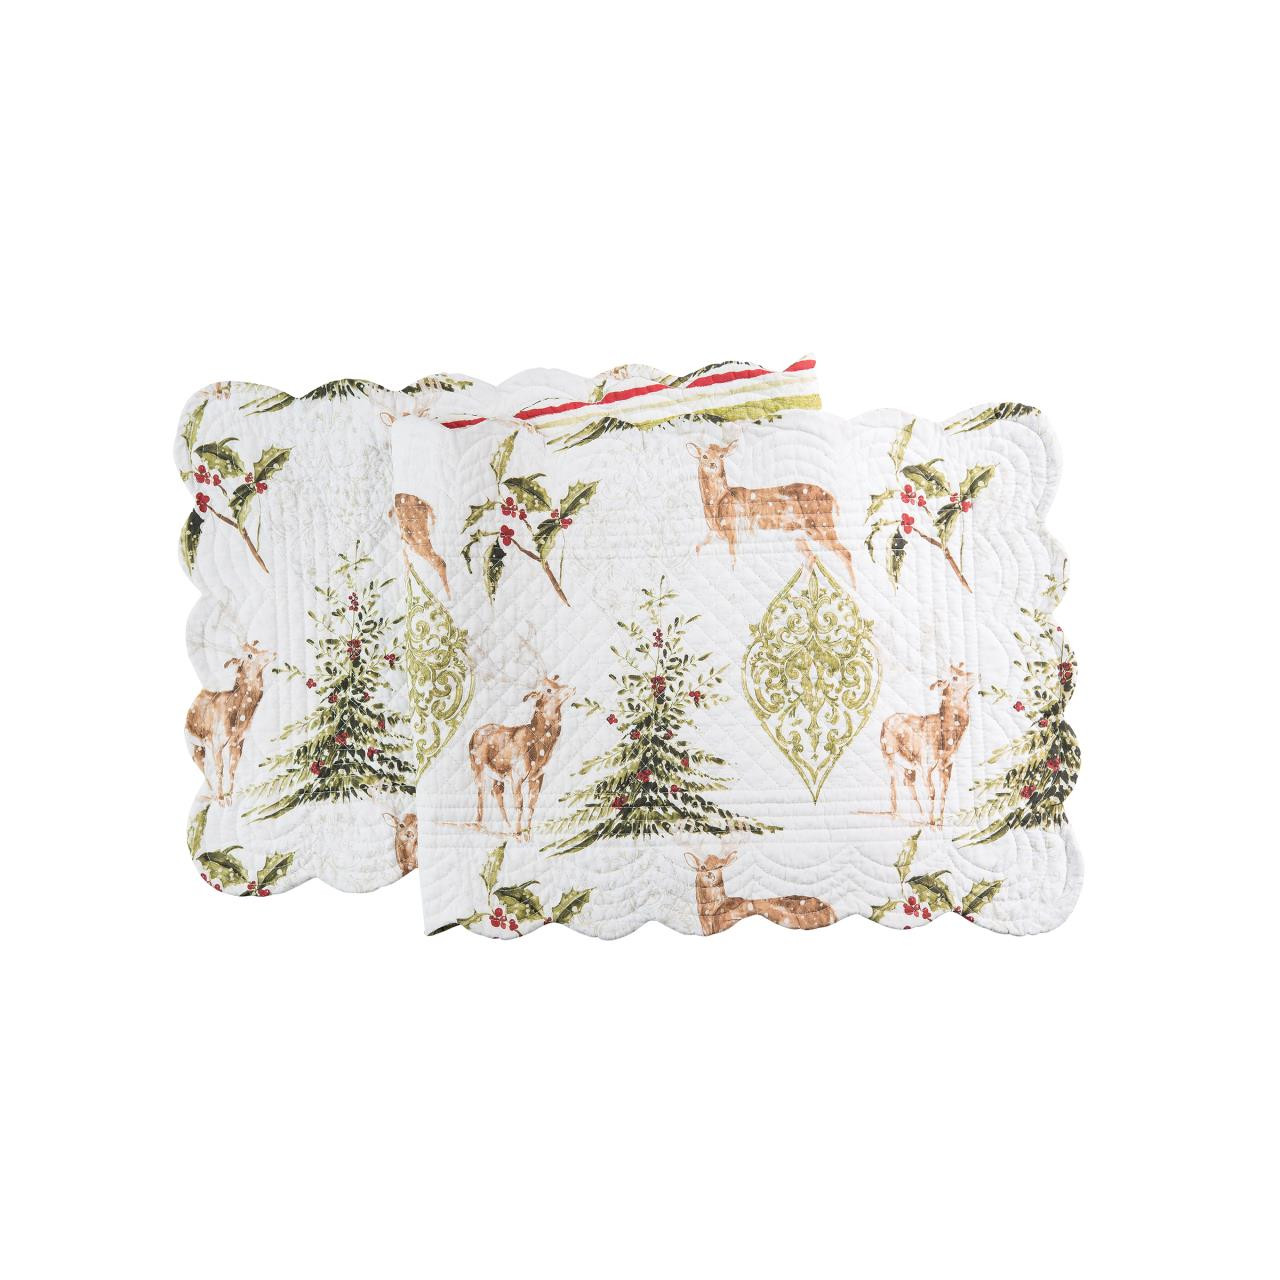 Reindeer Tracks Table Runner by C&F Home | Paul's Home Fashions